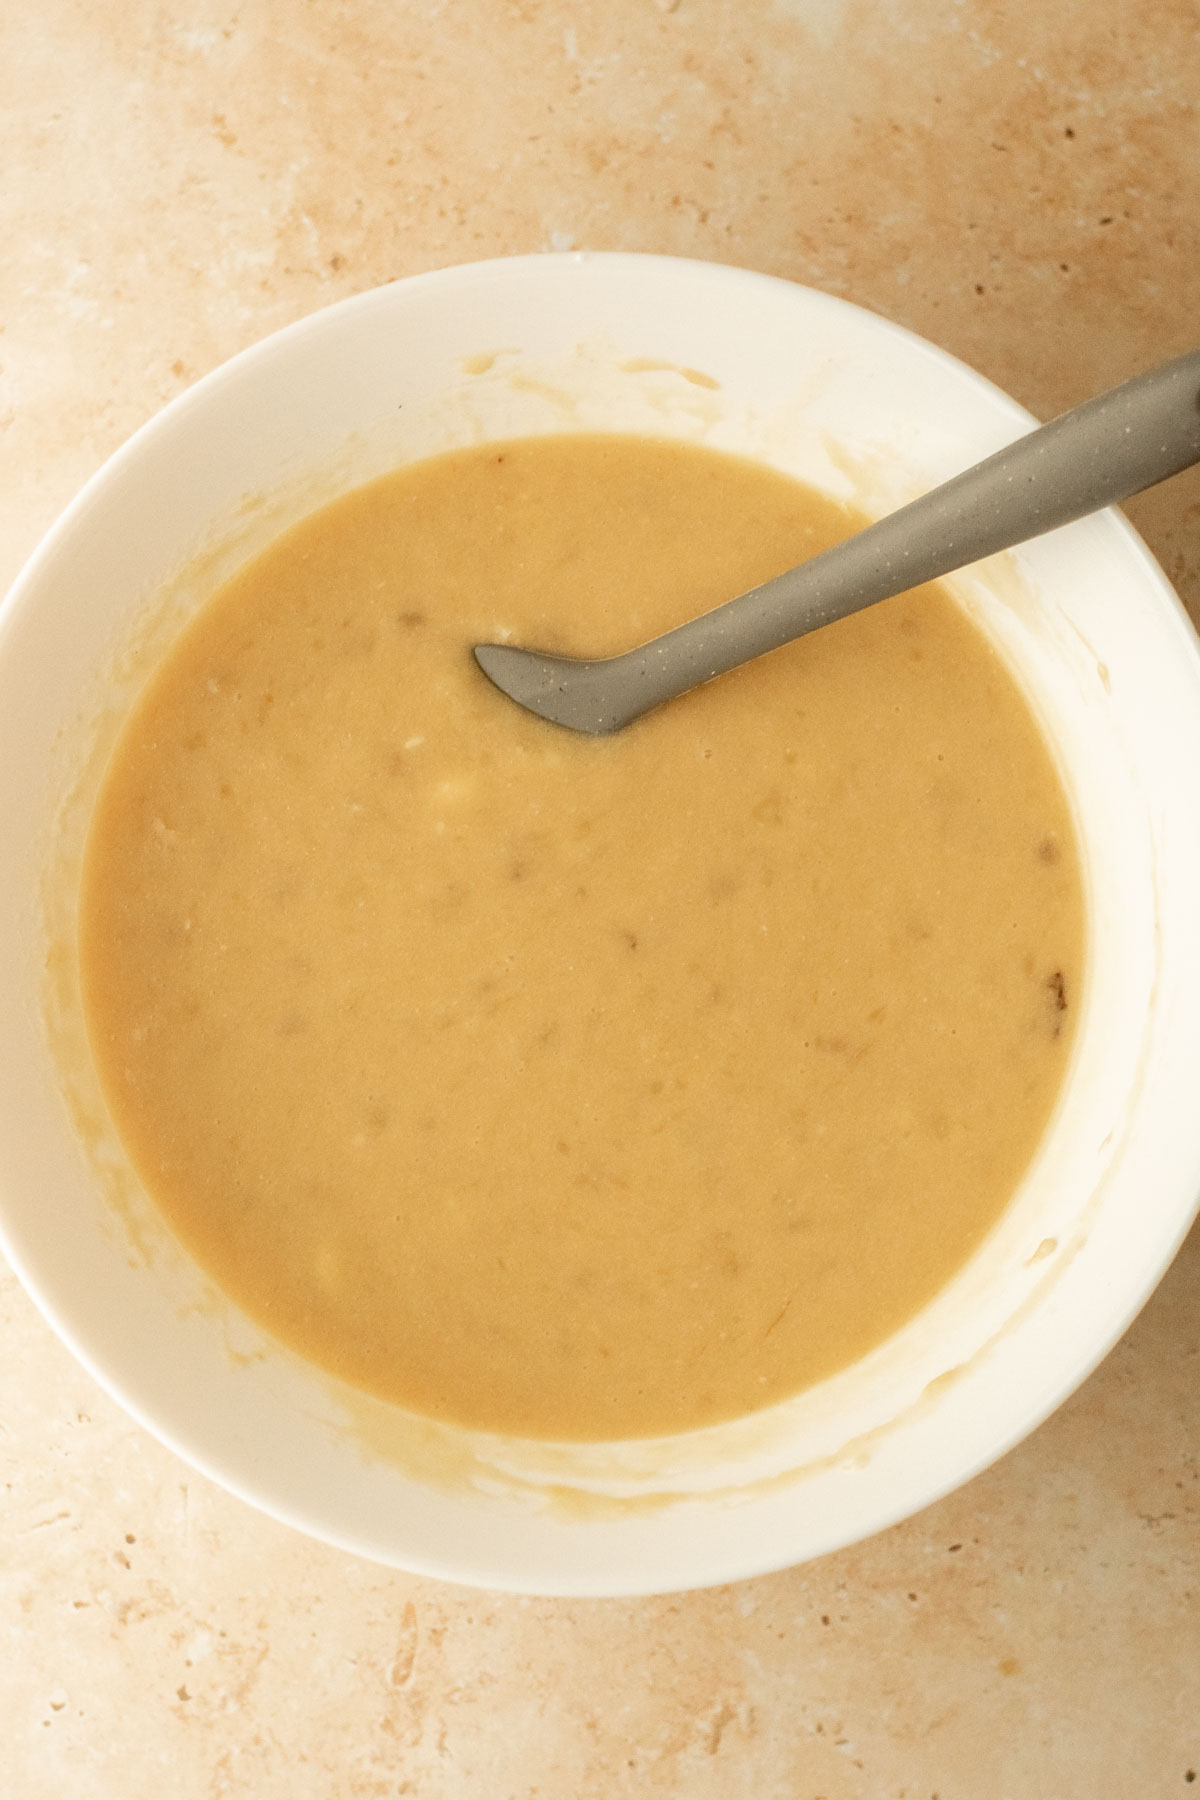 wet ingredients for banana bread mixed together in a bowl